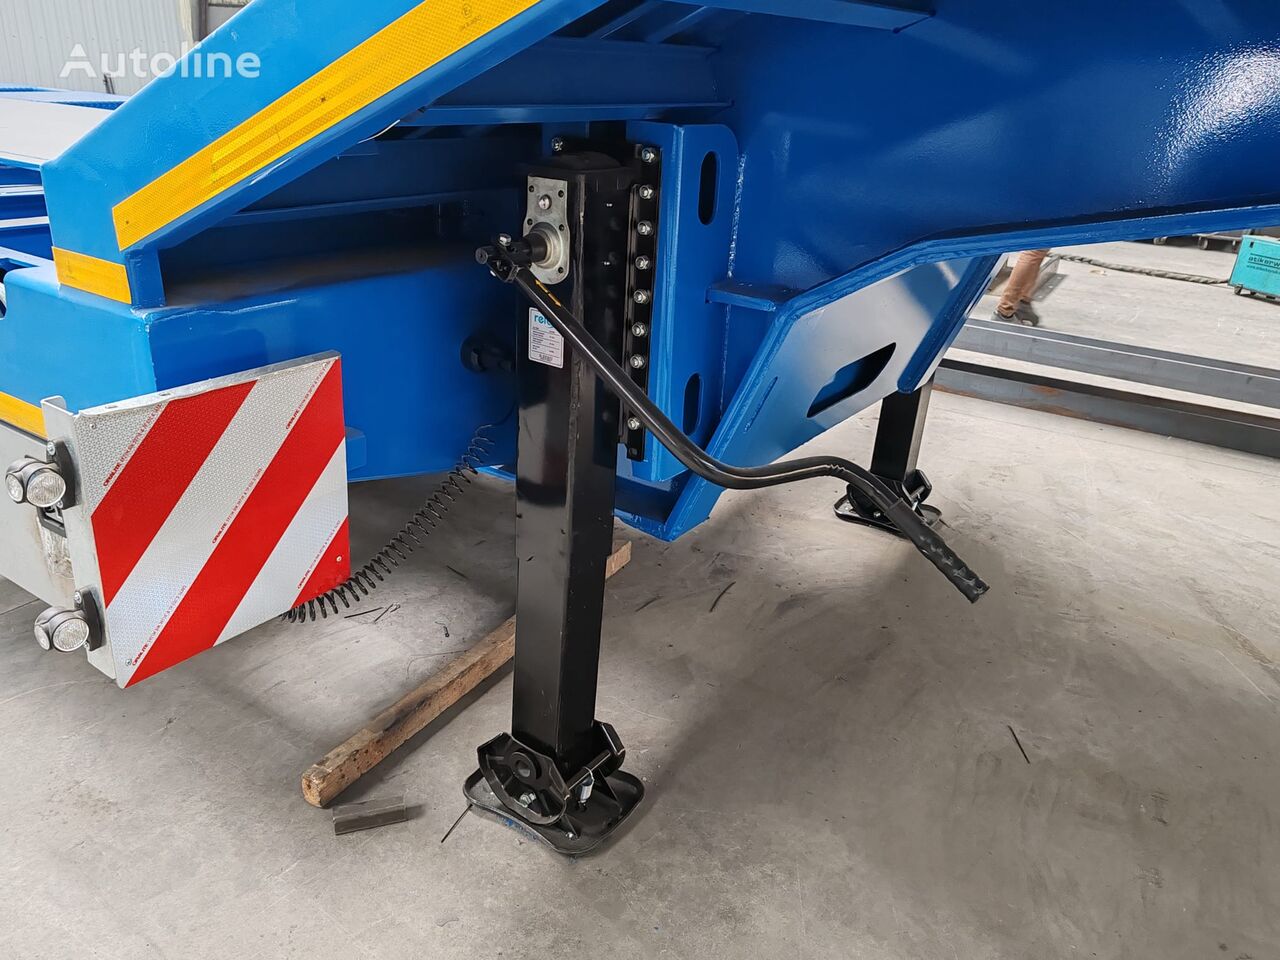 RelaxParts для полуприцепа RelaxParts SEMI TRAILER LANDING GEAR DIRECTLY FROM MANUFACTURER